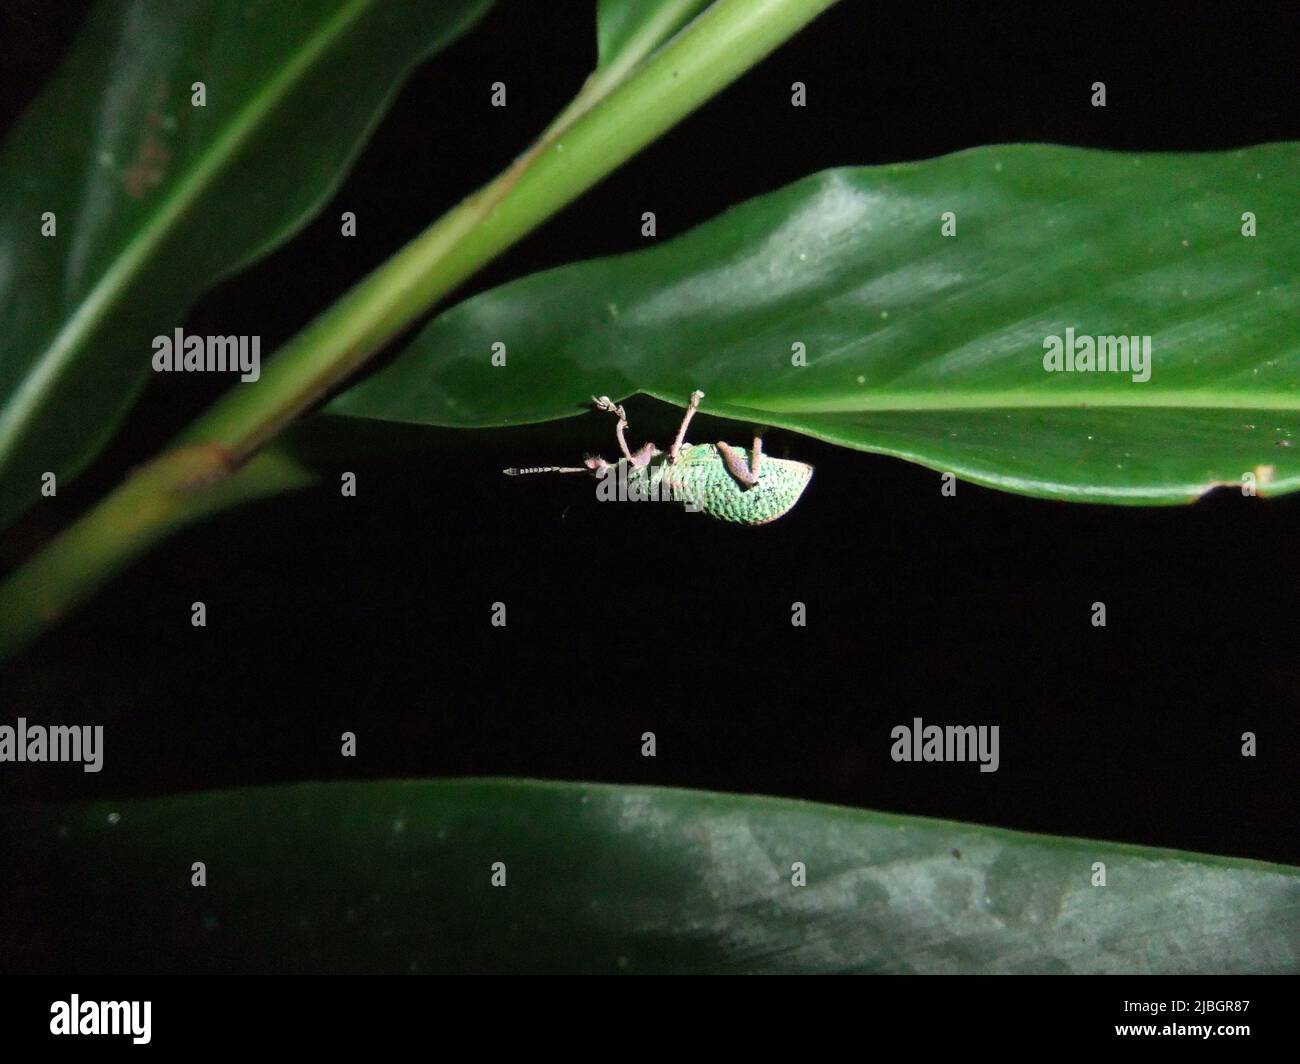 Green Immigrant Leaf Weevils (Polydrusus sericeus) isolated on a green tropical leaf with a dark background Stock Photo